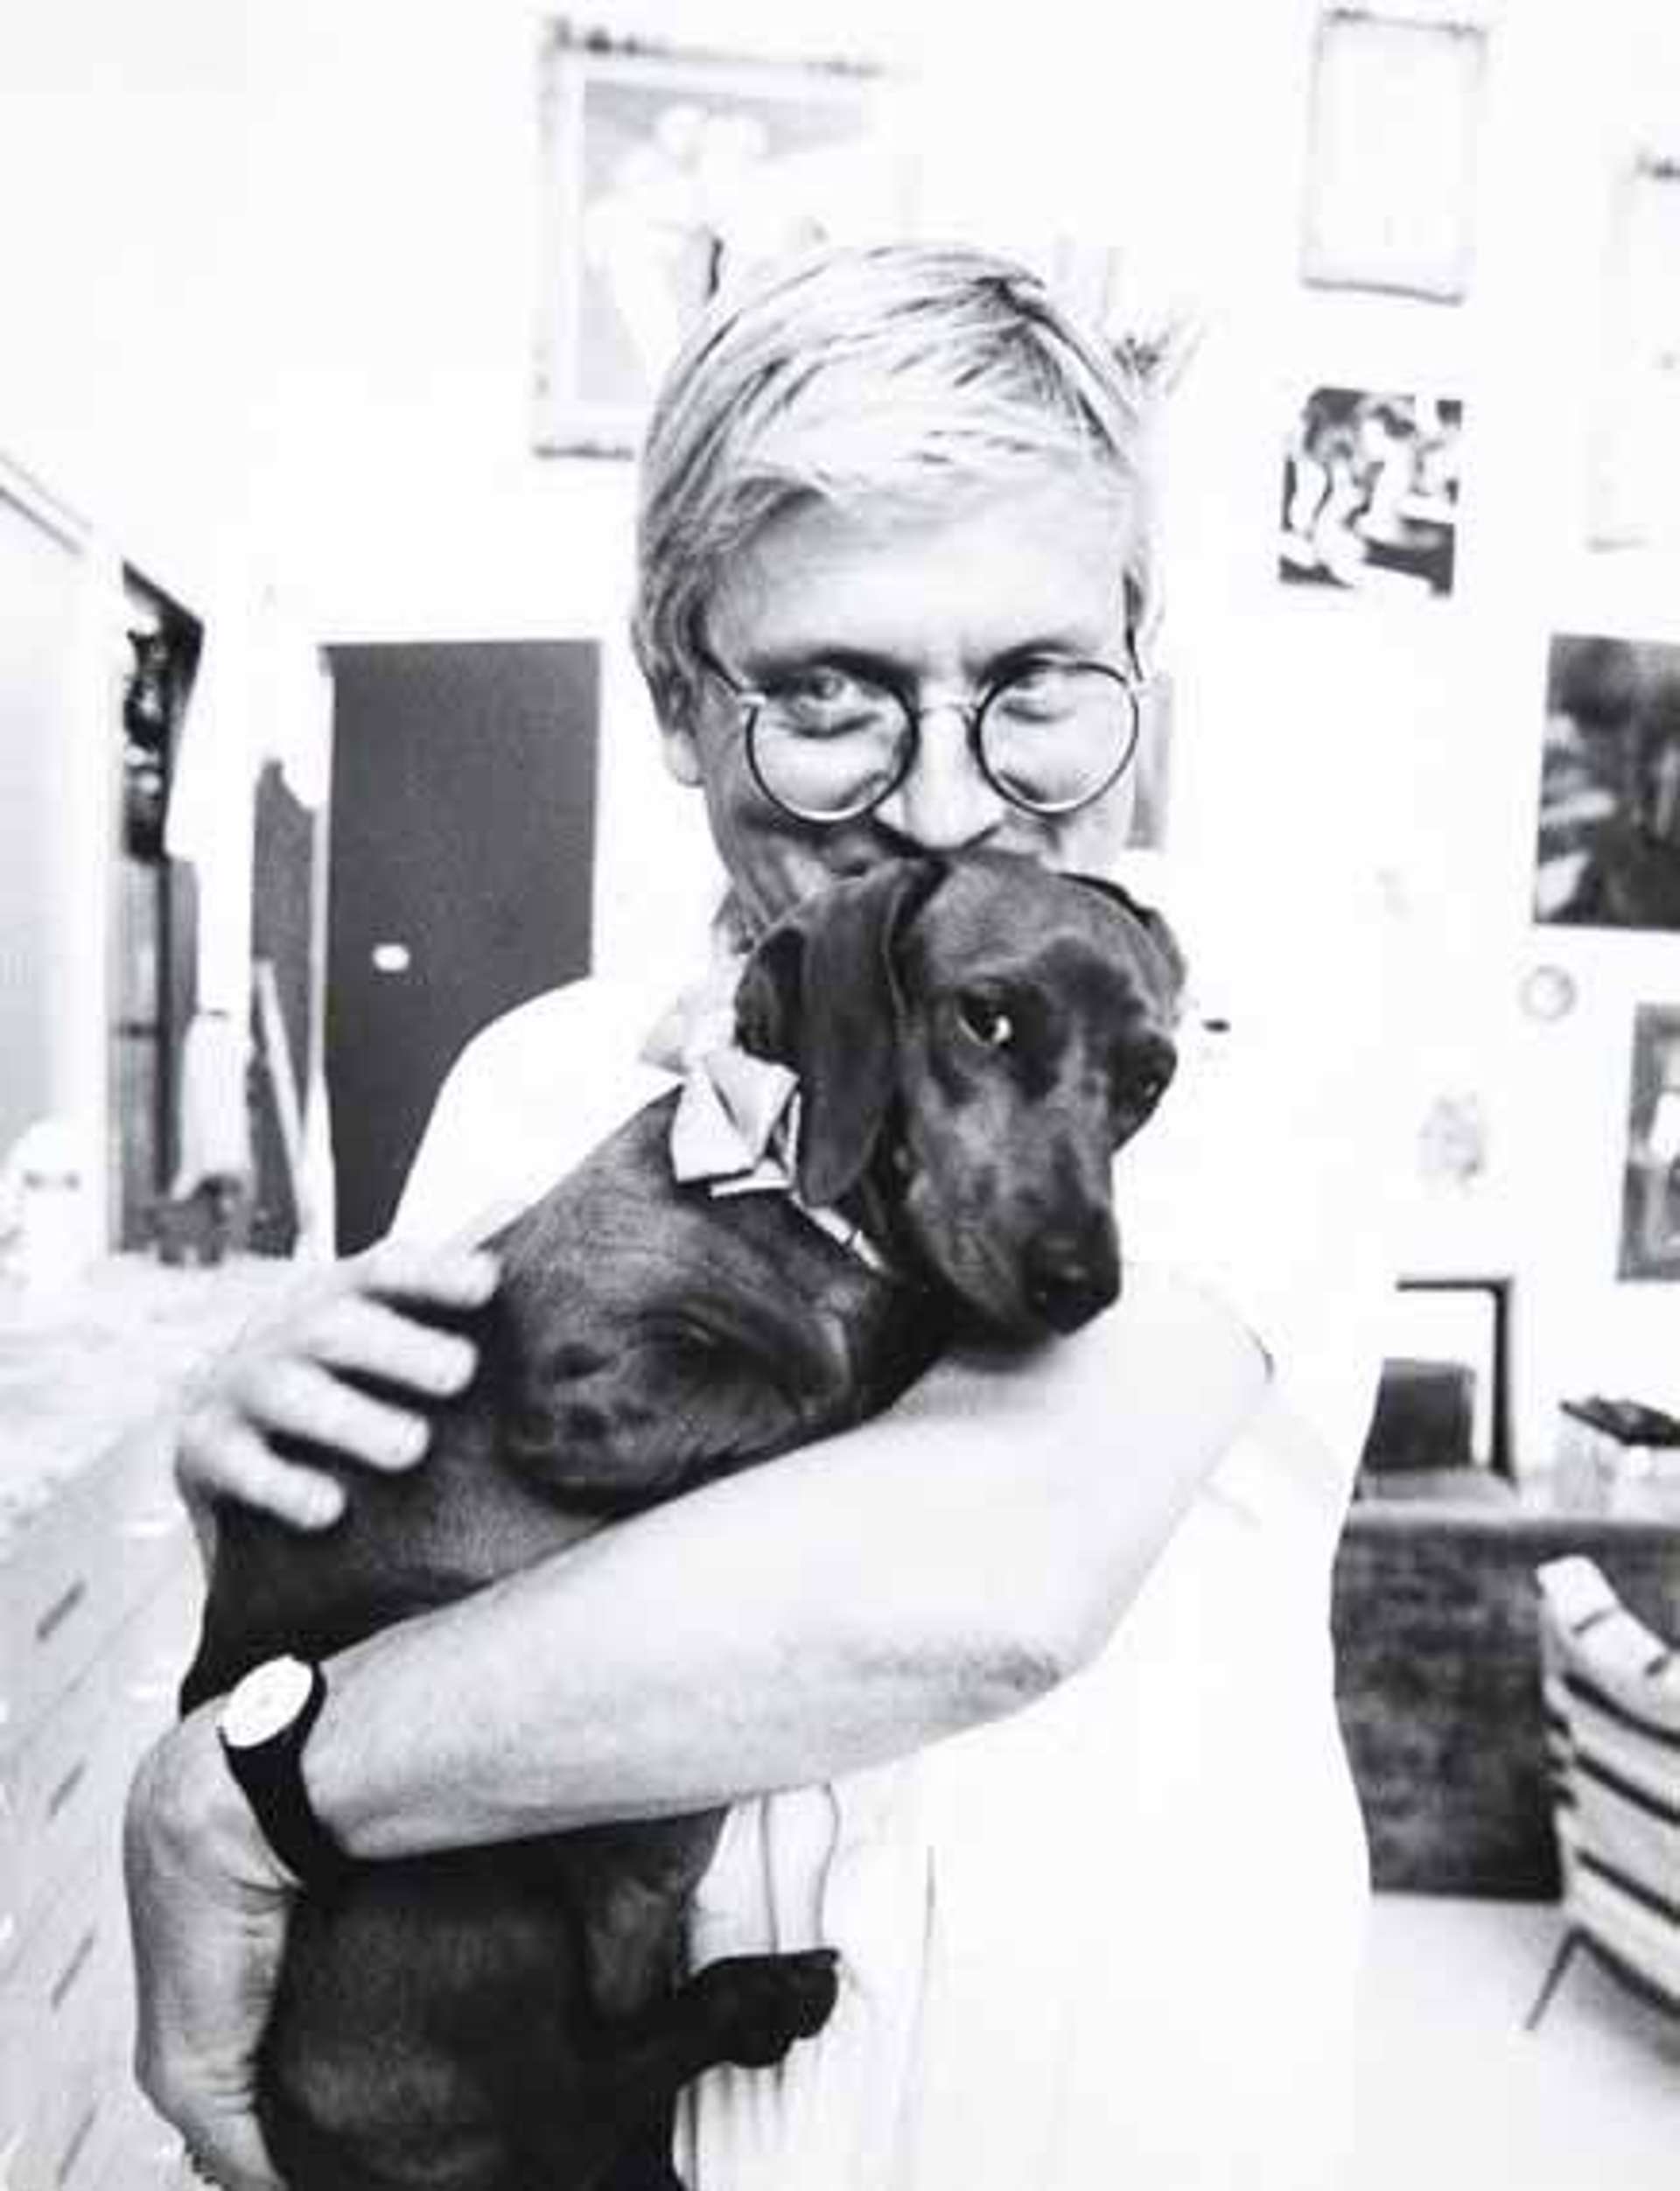 David Hockney’s Dachshunds. A black and white photographic print of David Hockney holding a Dachshund in his arms. 